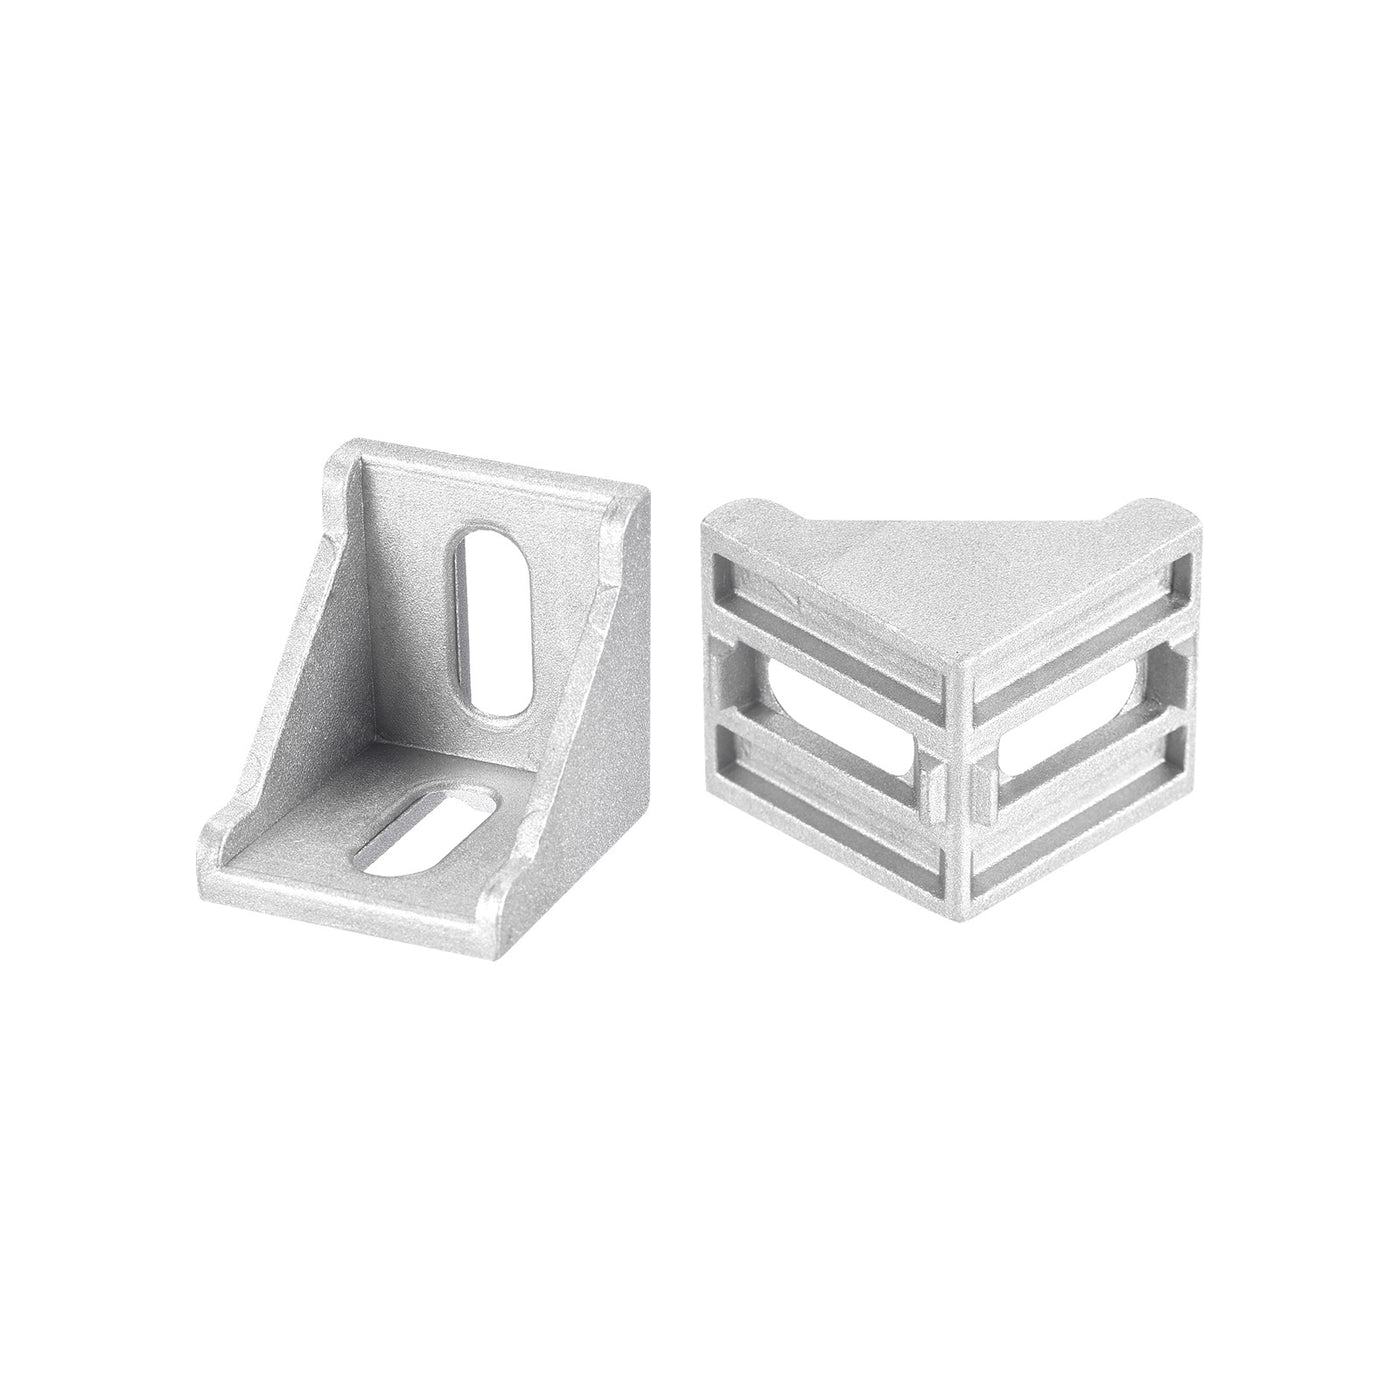 Uxcell Uxcell 8Pcs Inside Corner Bracket Gusset, 38x38x35mm 4040 Angle Connectors for 4040/4080 Series Aluminum Extrusion Profile Silver